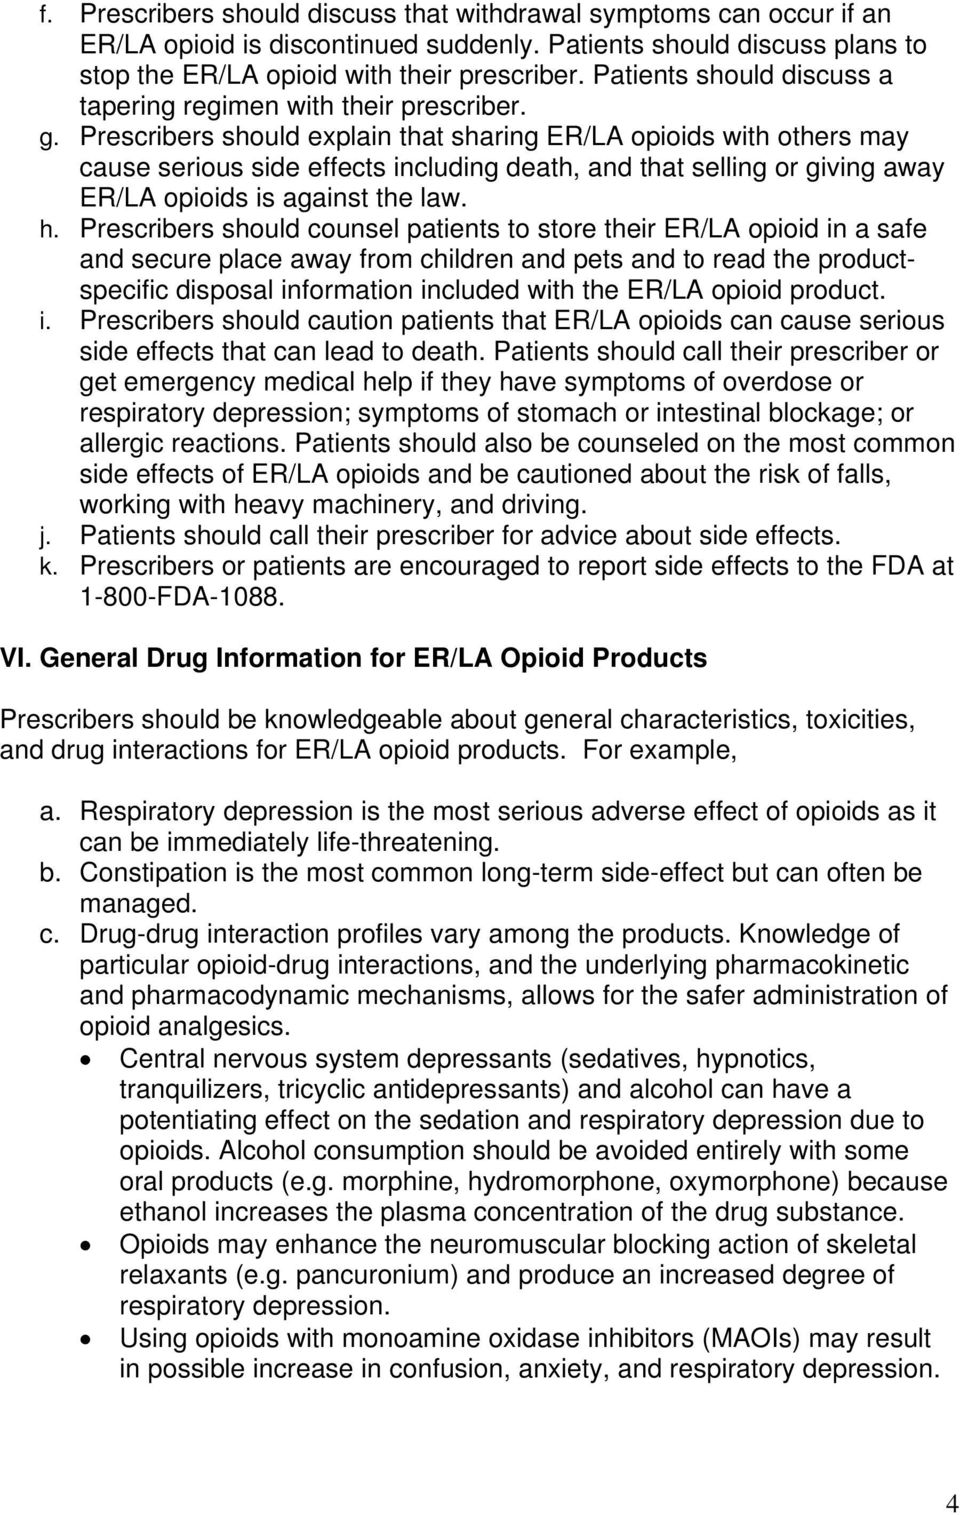 Prescribers should explain that sharing ER/LA opioids with others may cause serious side effects including death, and that selling or giving away ER/LA opioids is against the law. h.